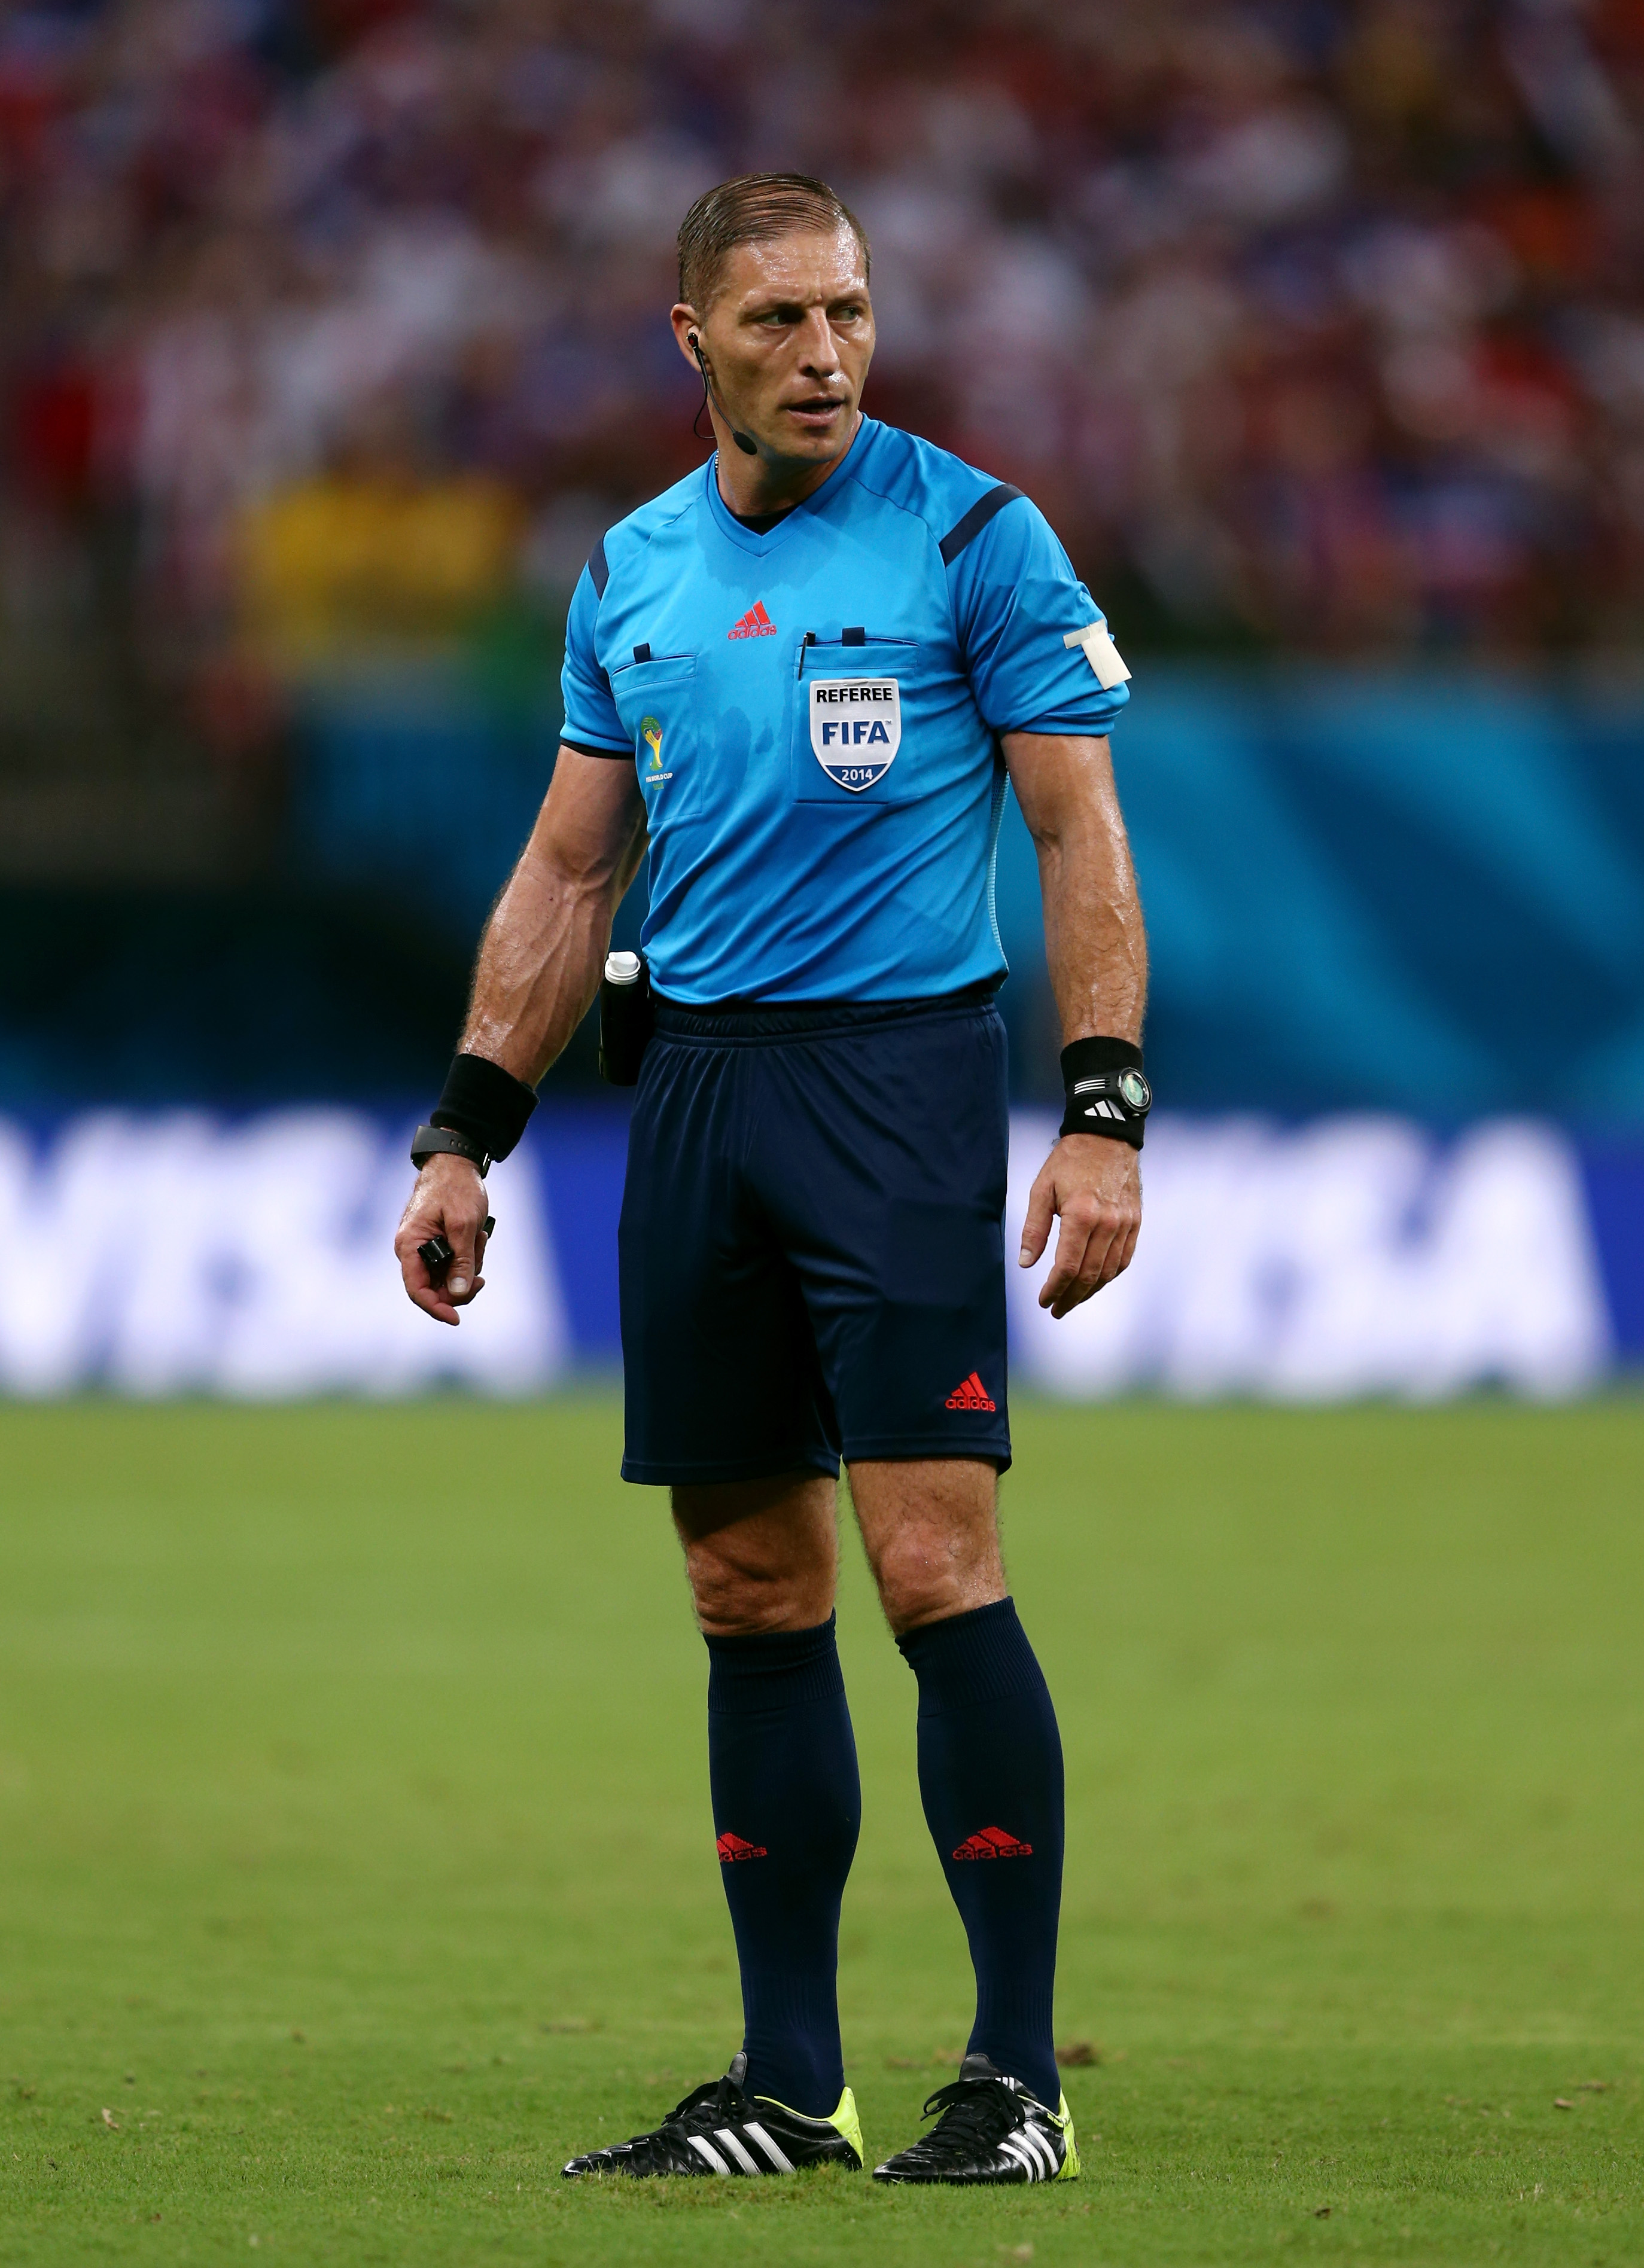 The Ed Hochuli of FIFA is Nestor Pitana, A Guy With Muscles the Size of Brazil